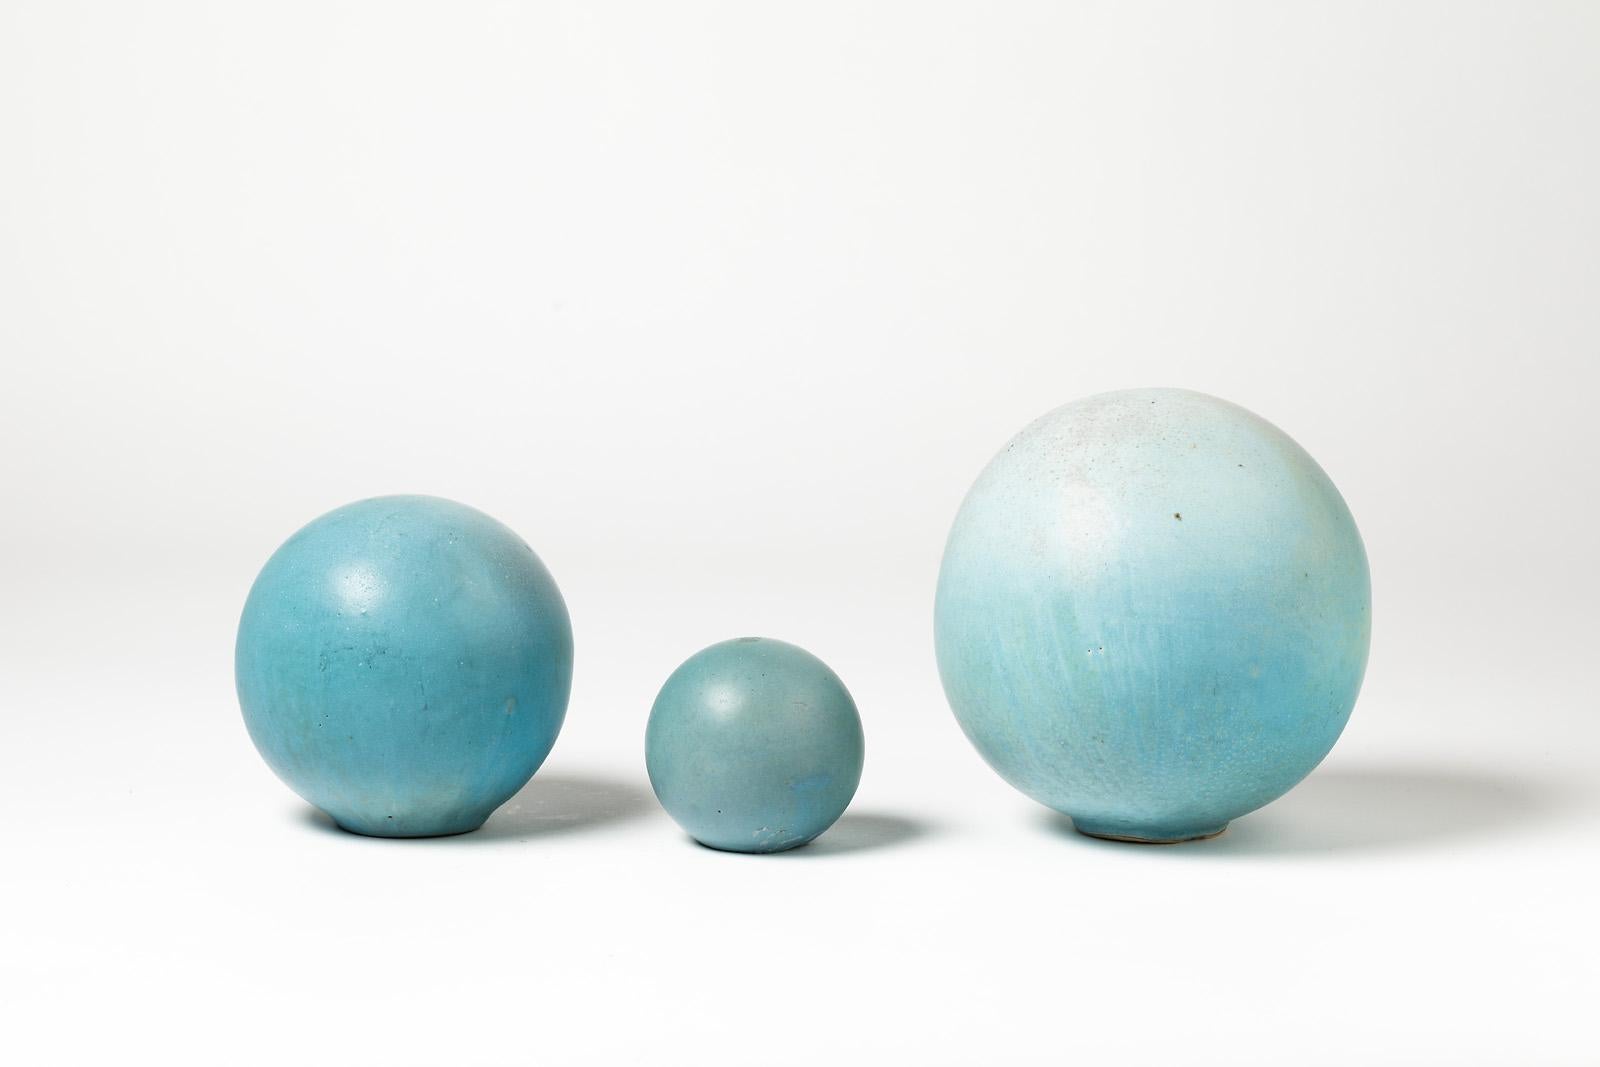 A set of three ceramic sculptures with blue glaze decoration by Tim Orr.
Perfect original conditions.
Signed under the base,
circa 1970.
Dimensions:
18 x 18 cm / 7' x 7 ' inches.
14 x 14 cm / 5' 1/2 x 5' 1/2 inches.
9 x 9 cm / 3' 1/2 x 3' 1/2